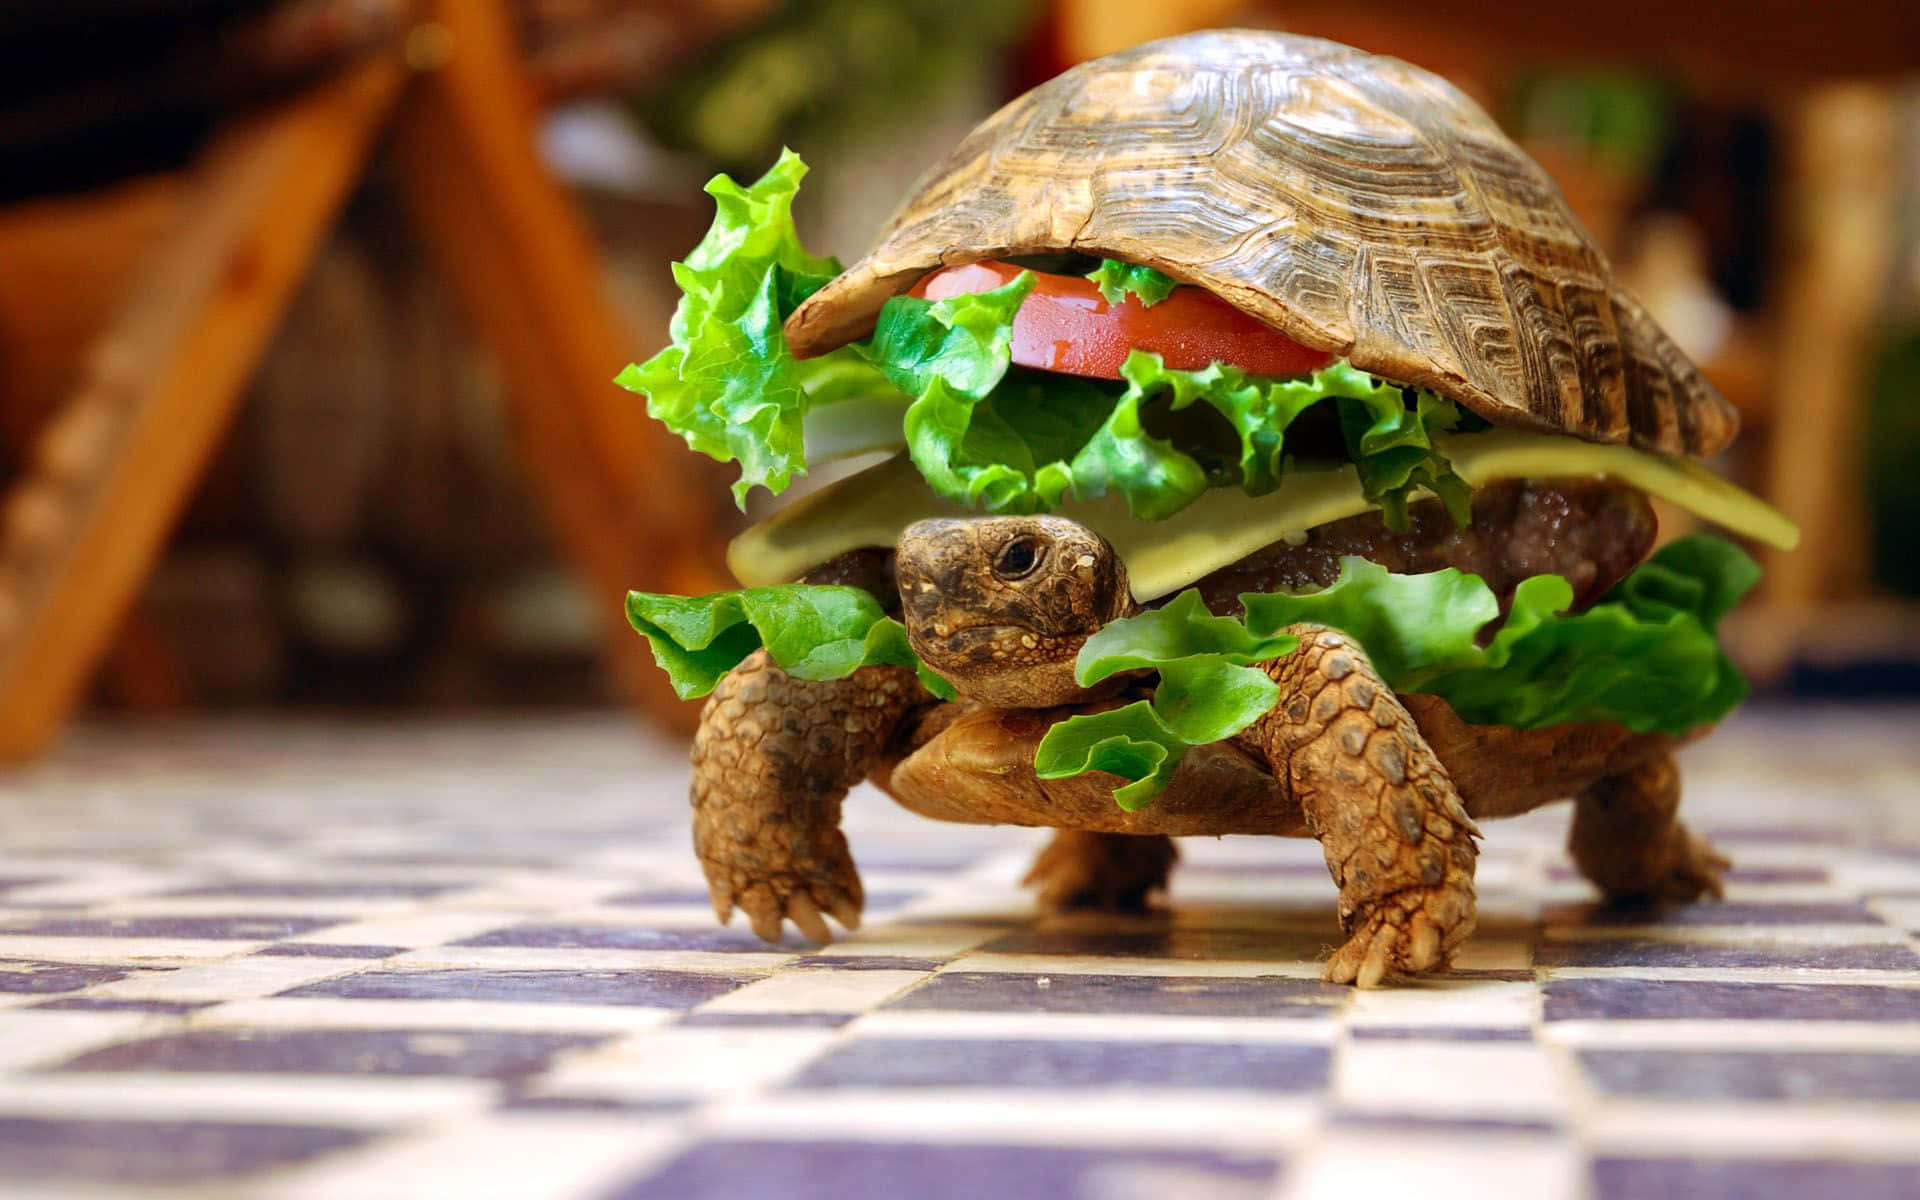 a tortoise is walking around with a burger on its back